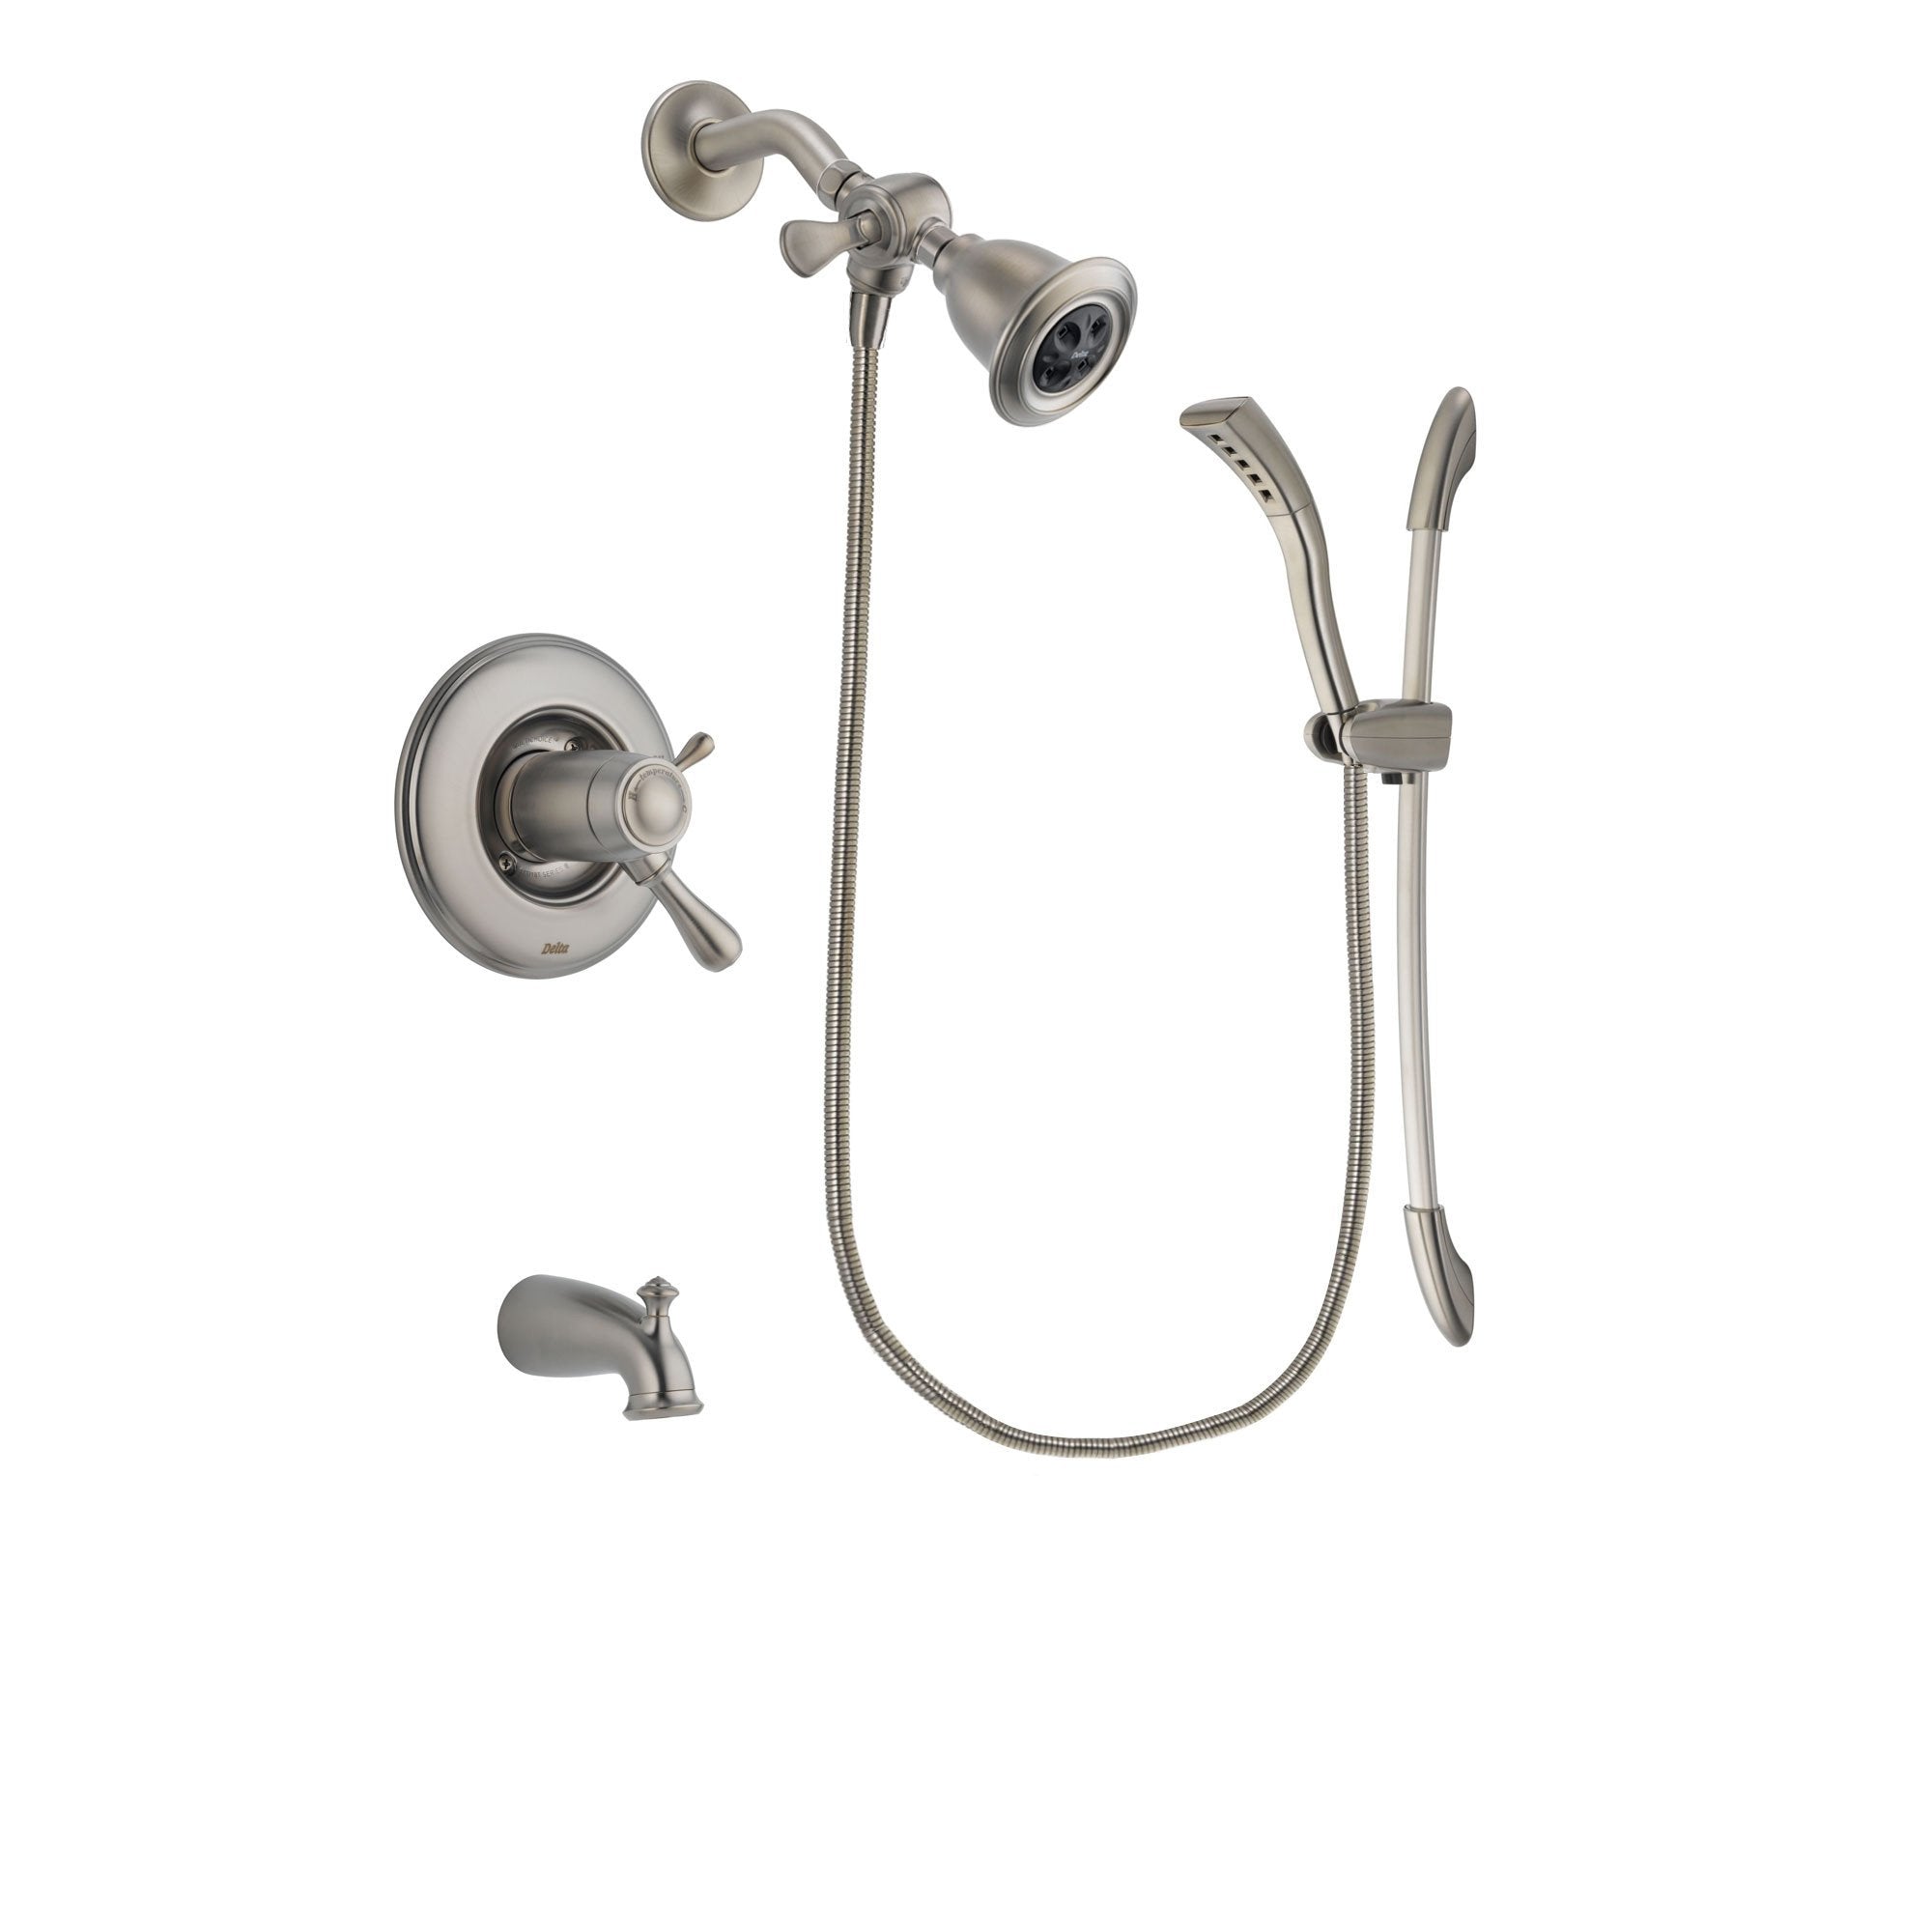 Delta Leland Stainless Steel Finish Thermostatic Tub and Shower Faucet System Package with Water Efficient Showerhead and Handshower with Slide Bar Includes Rough-in Valve and Tub Spout DSP1415V